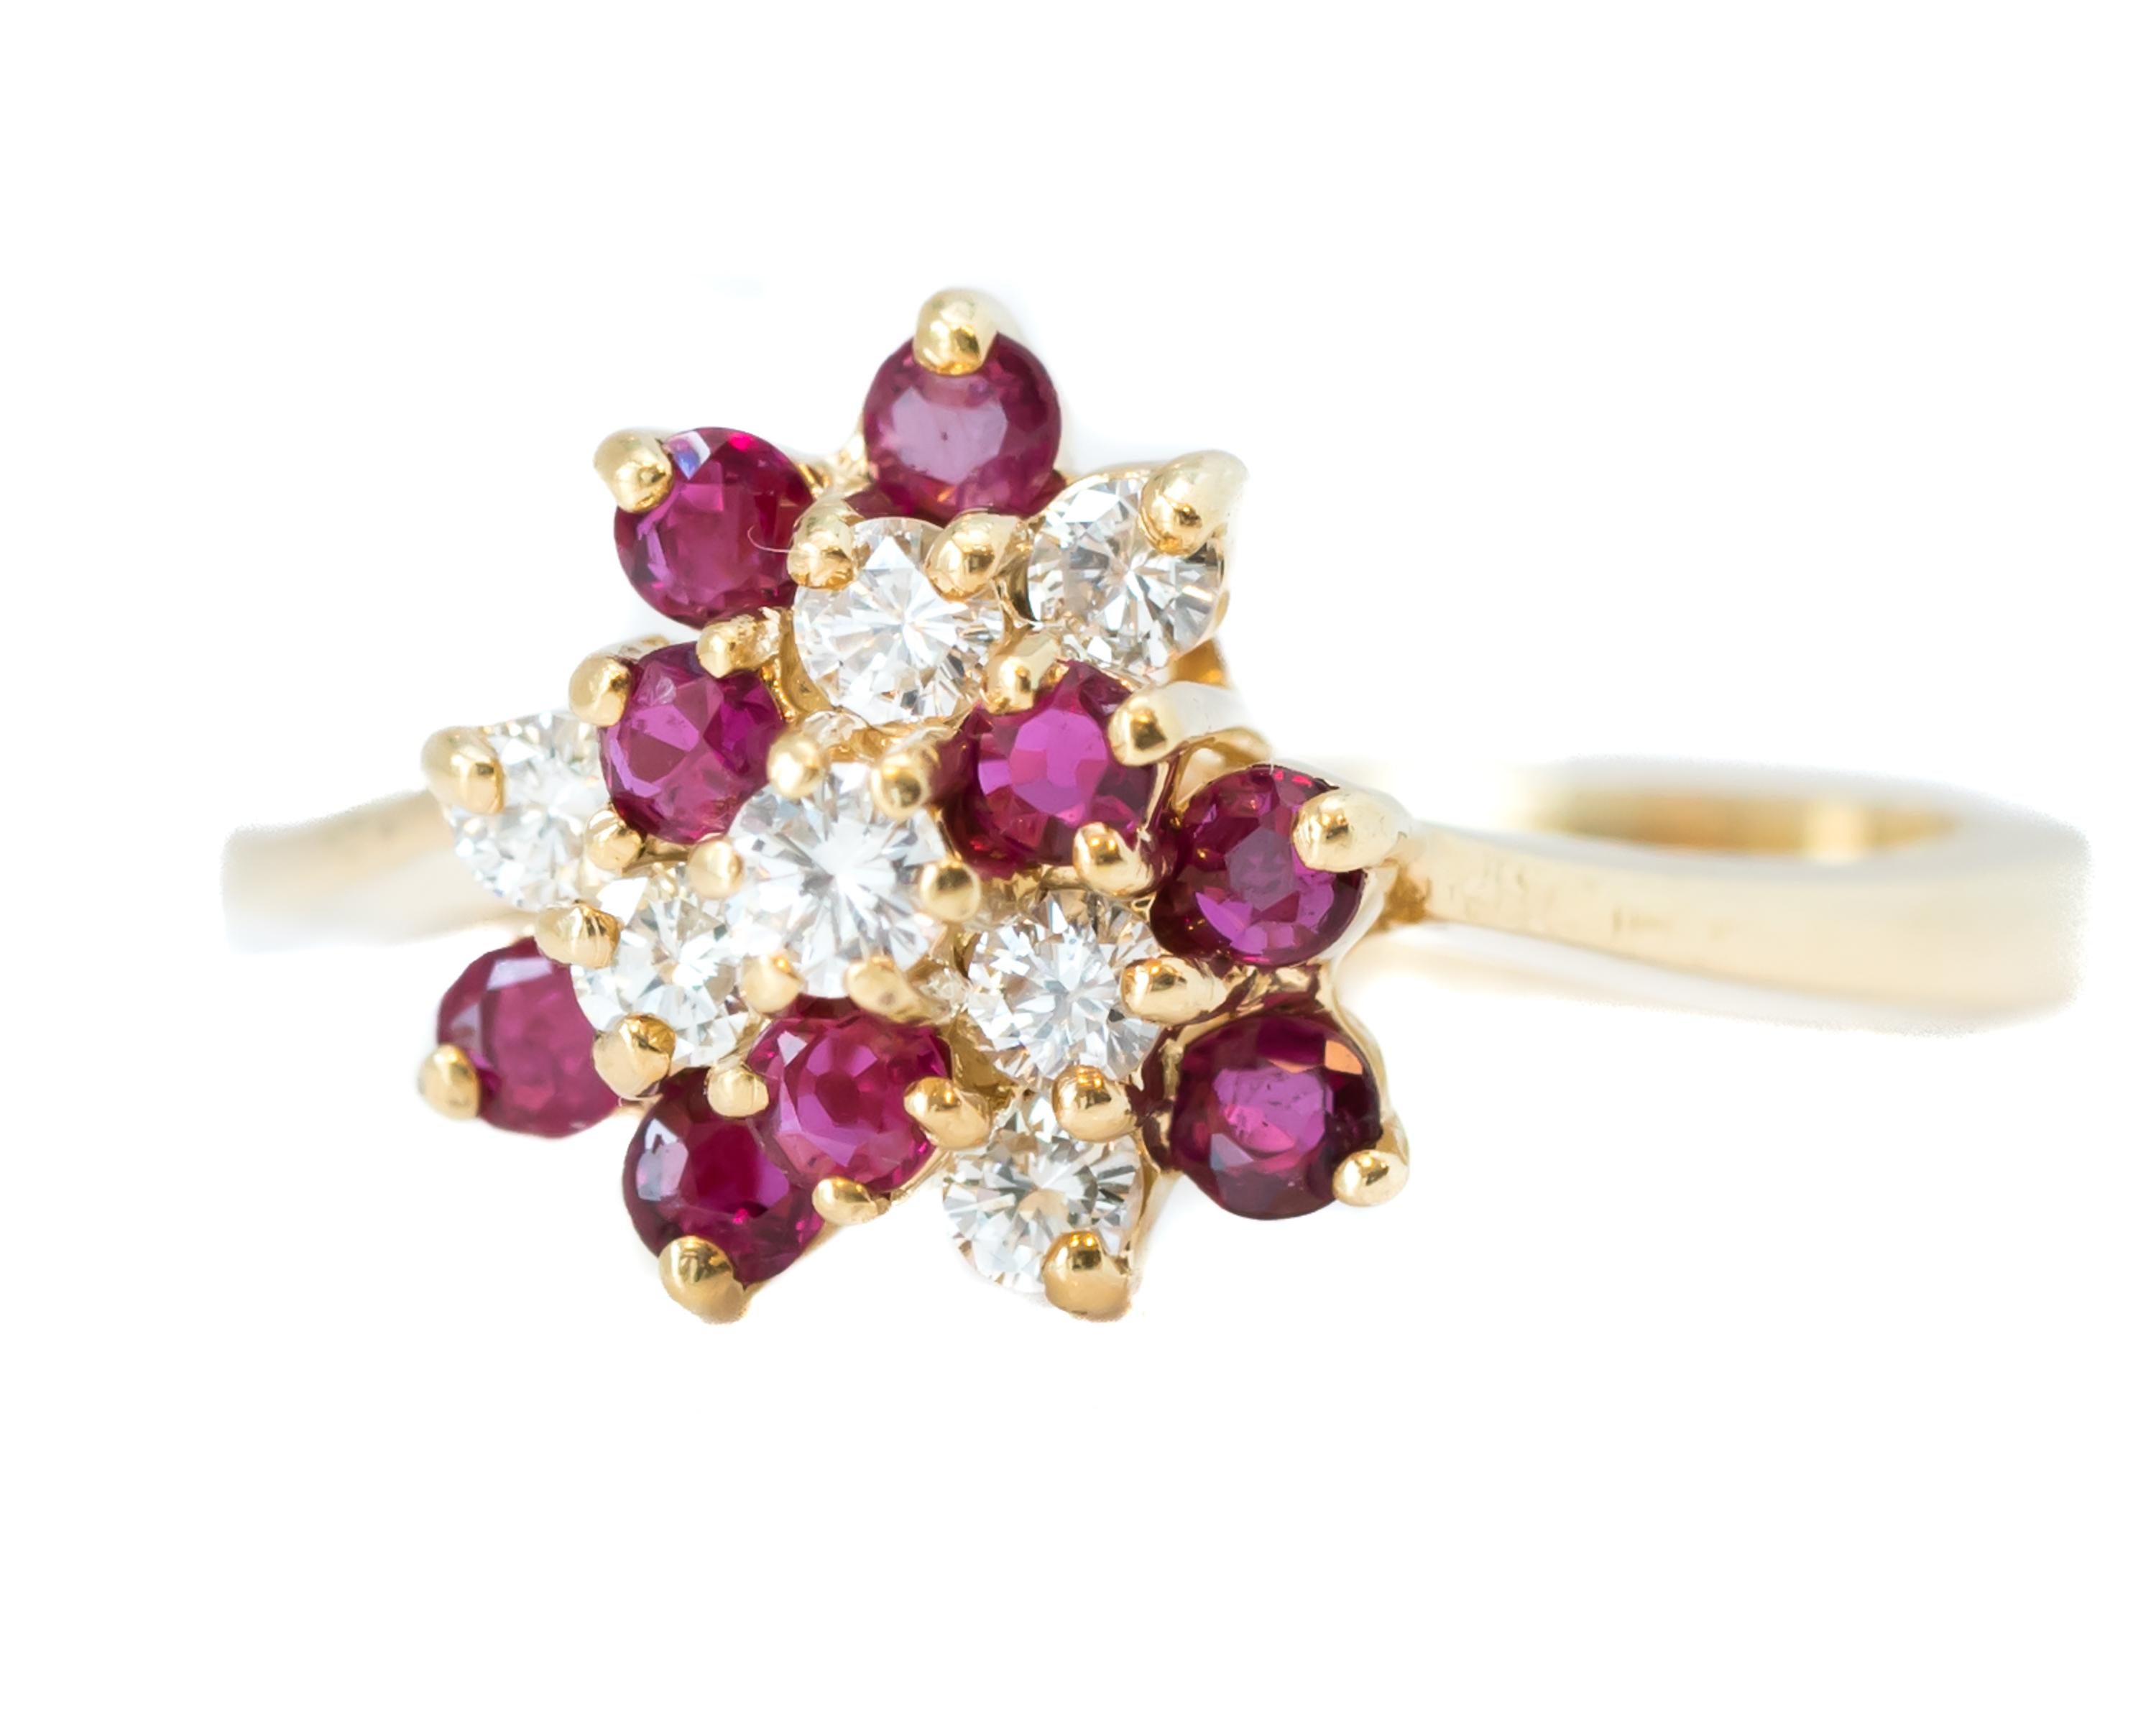 Features:
0.25 carat Rubies and 0.25 carat Diamonds
All diamonds and rubies are prong set
Beautiful 14 karat Yellow Gold Tiered cluster setting

Ring Details:
Size: 6, can be resized
Metal: 14 karat Yellow Gold
Weight: 2.7 grams
Hallmark: